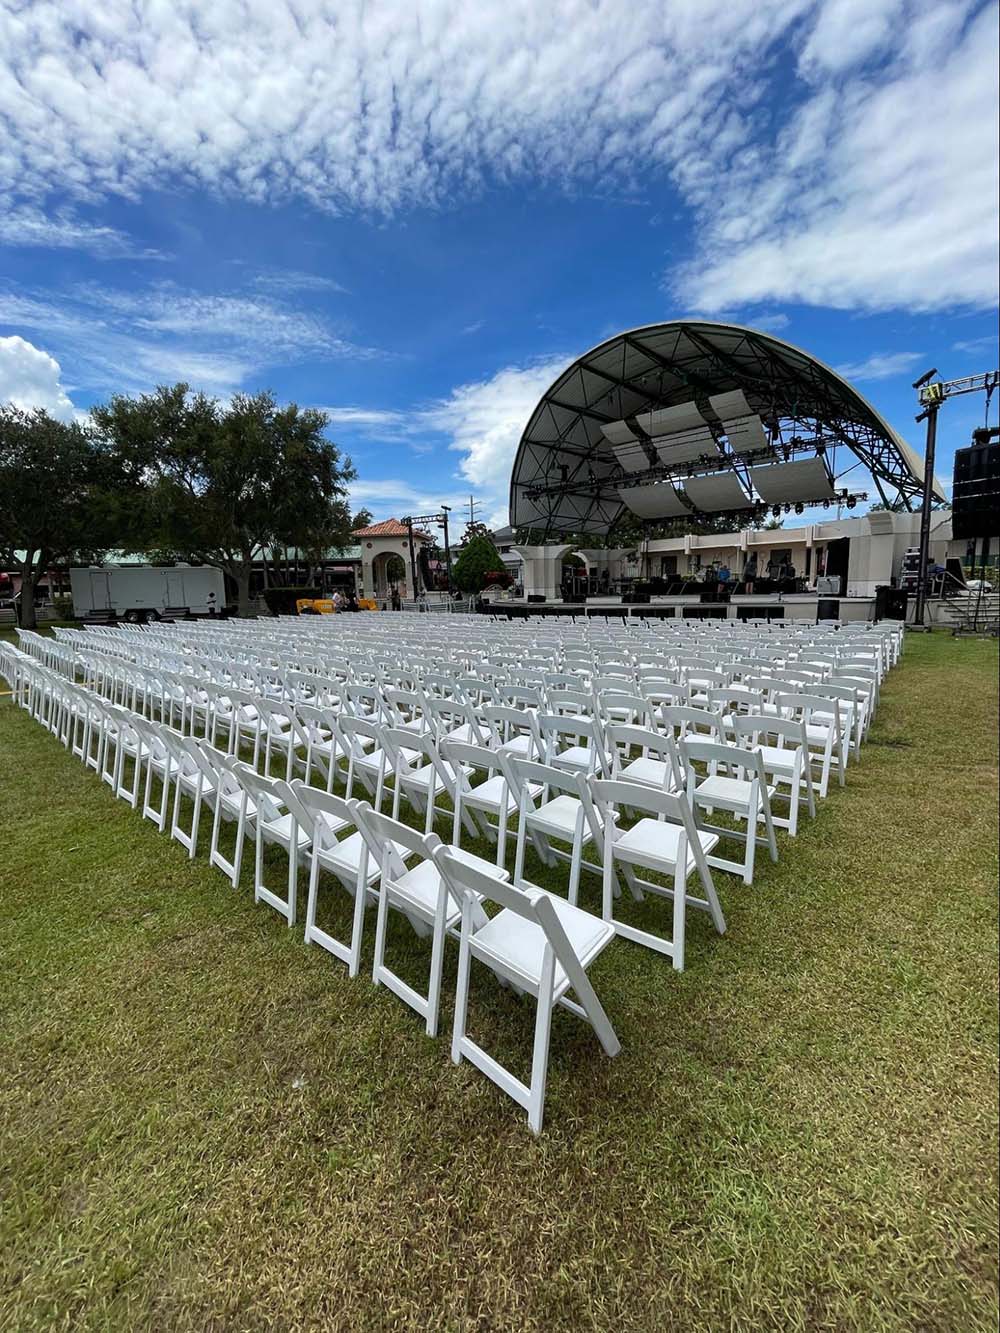 An outdoor stage with rows of white chairs lined out in front of it